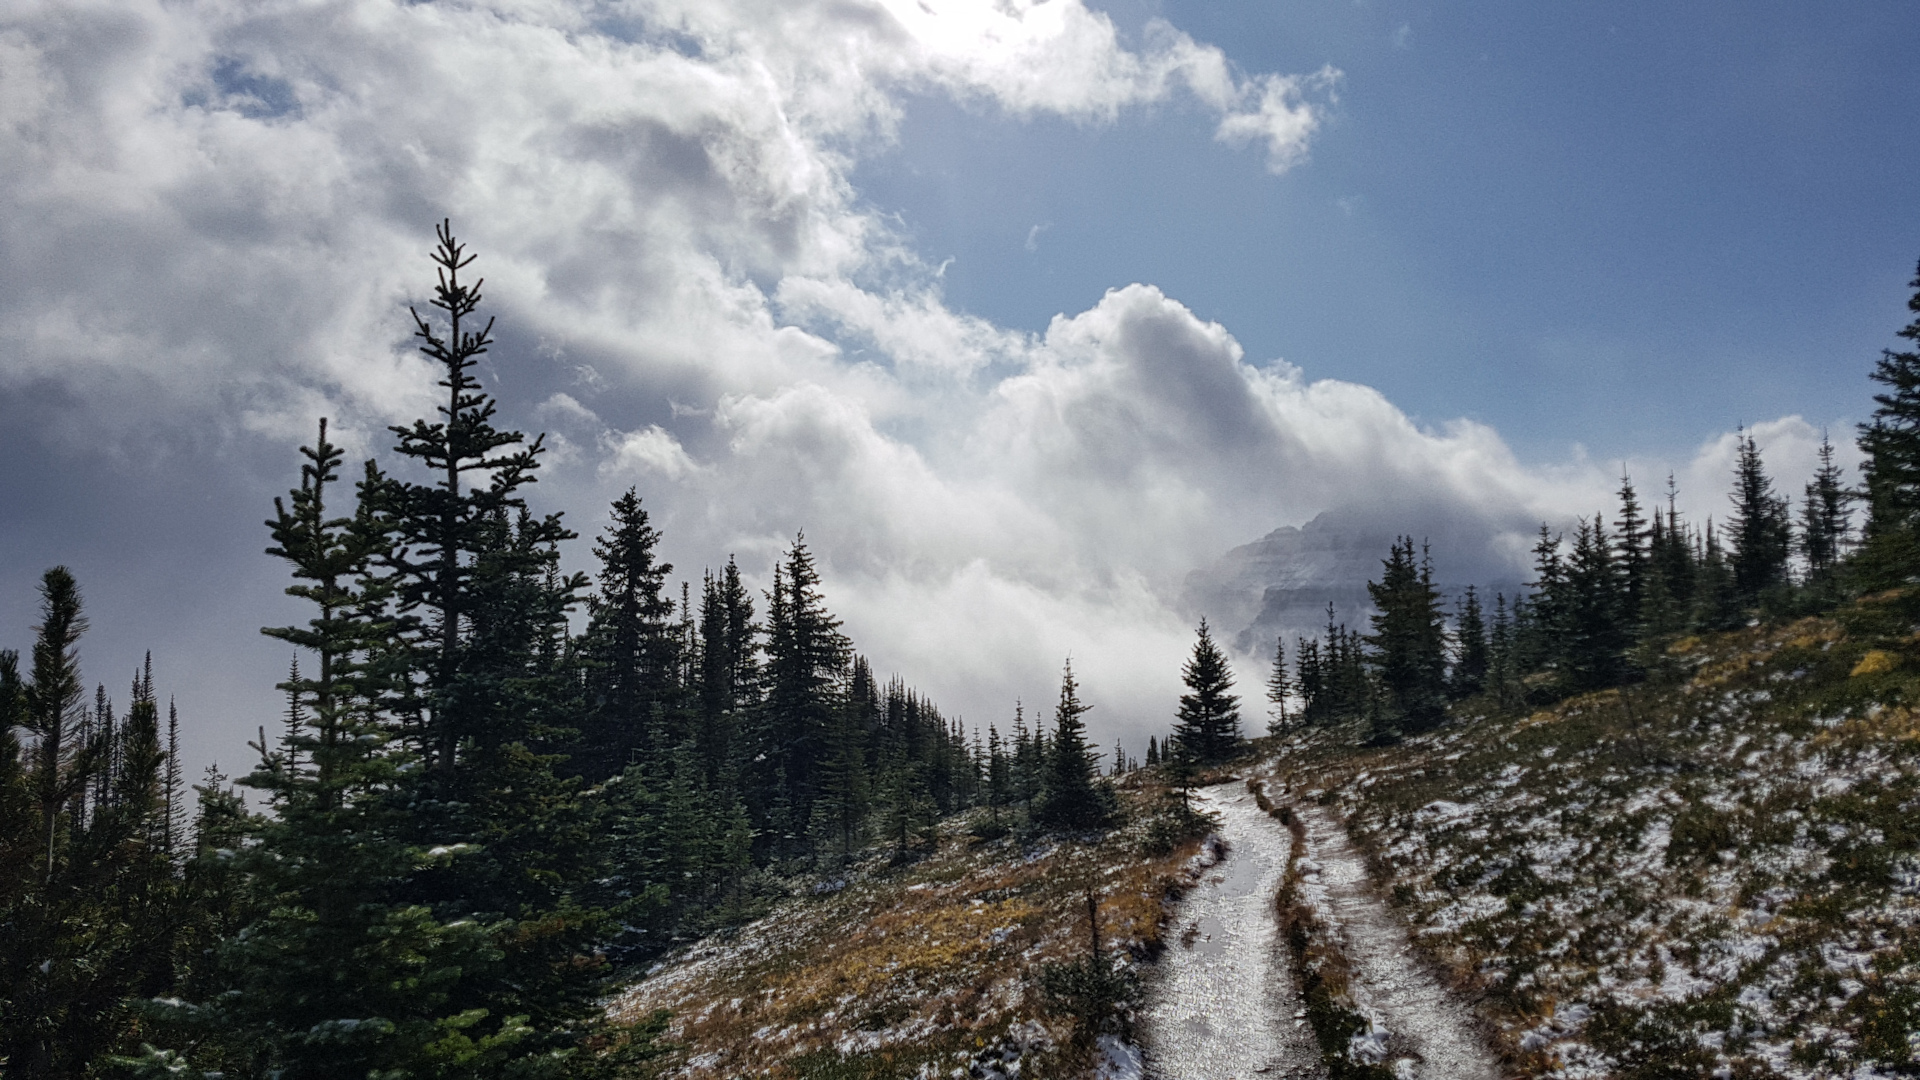 Clouds moving temporarily on Dolomite Pass hiking trail. Weather was changing rapidly throughout the day.